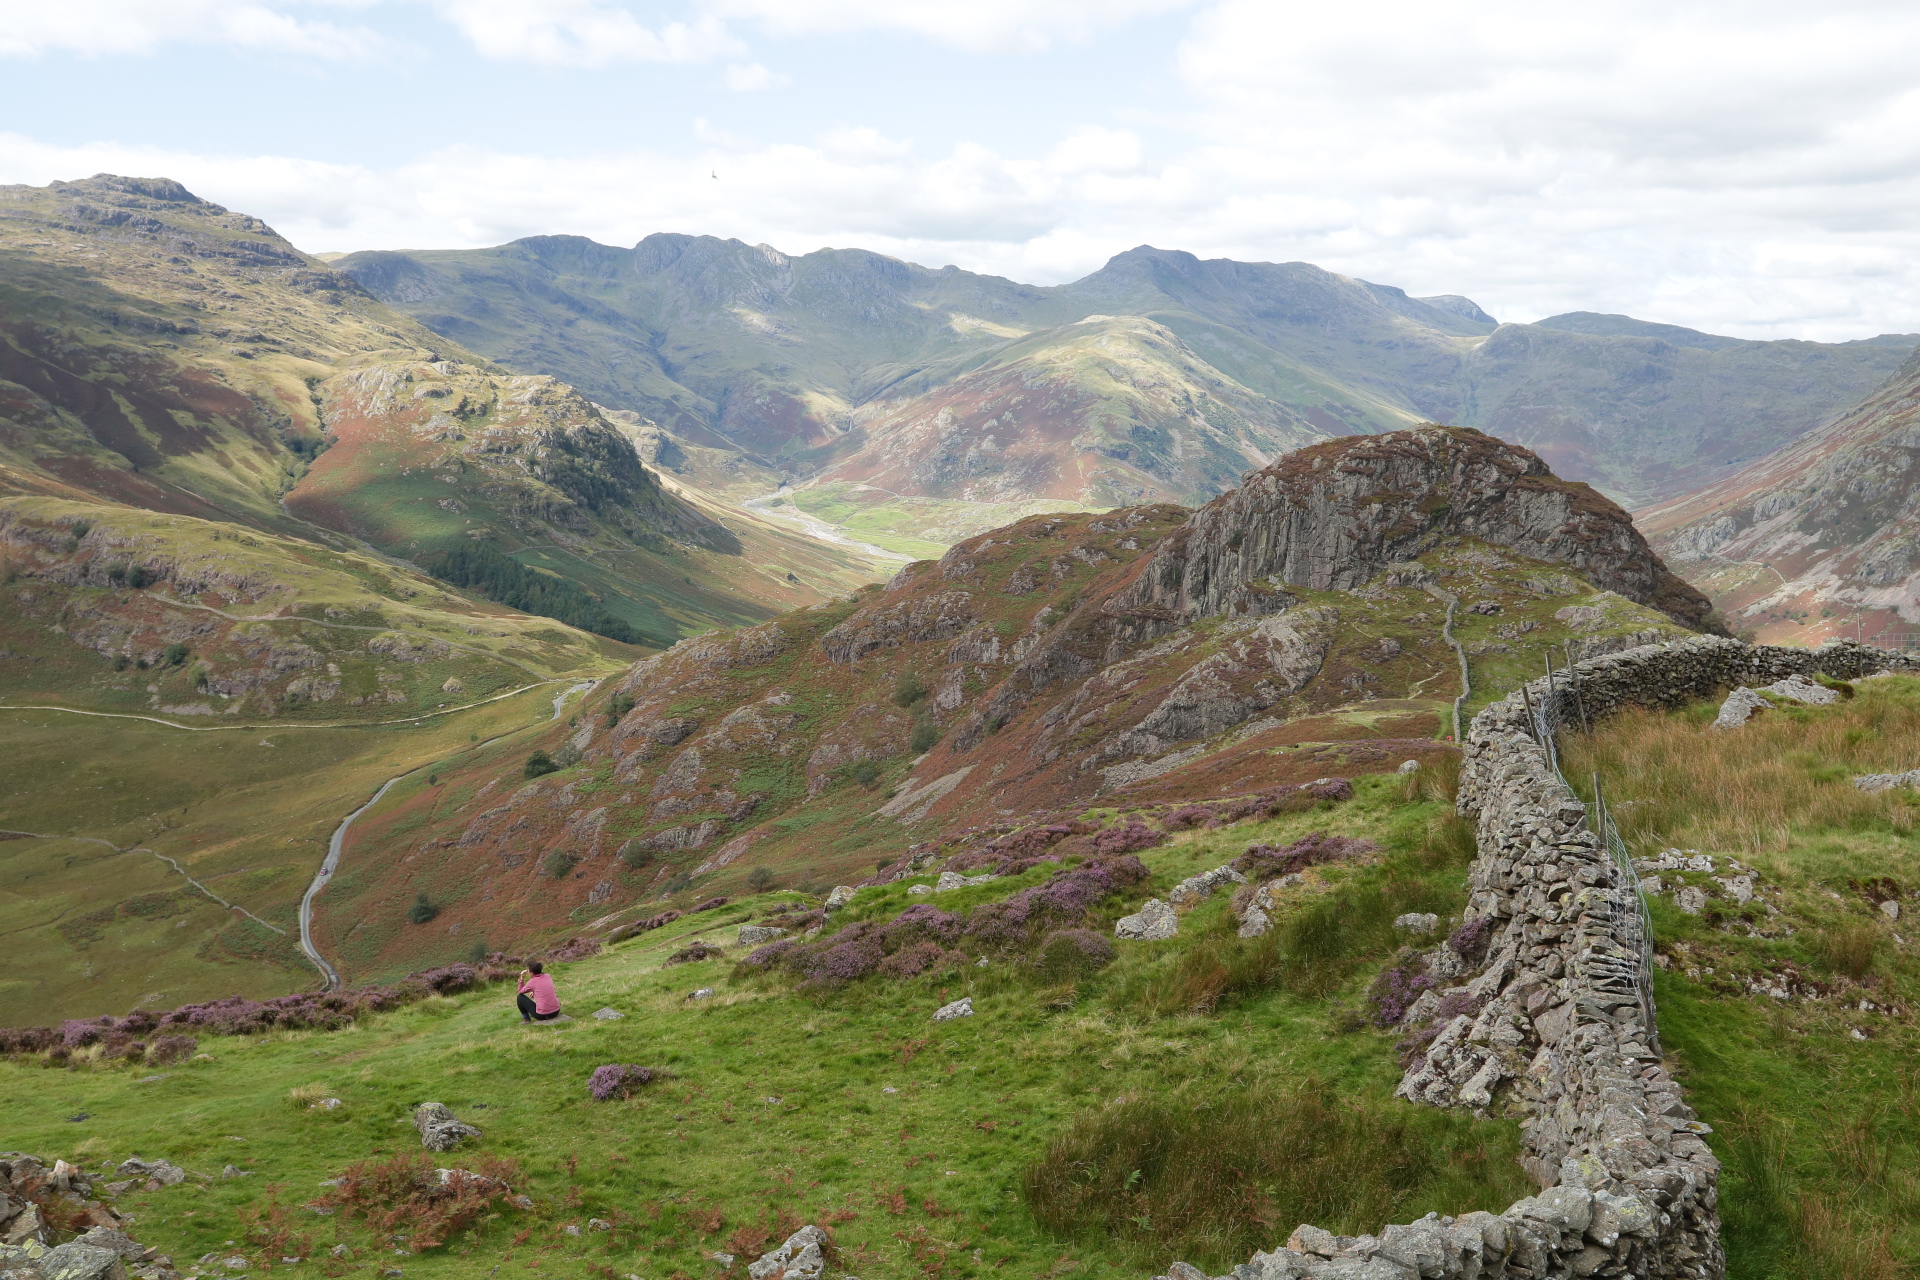 Image shows a wide view of the Lake District mountains. The grass is green with purple and red shrubs. Deep valleys are visible and the sun is shining in spots around the hills. You can see Sophia sitting on a rock. 